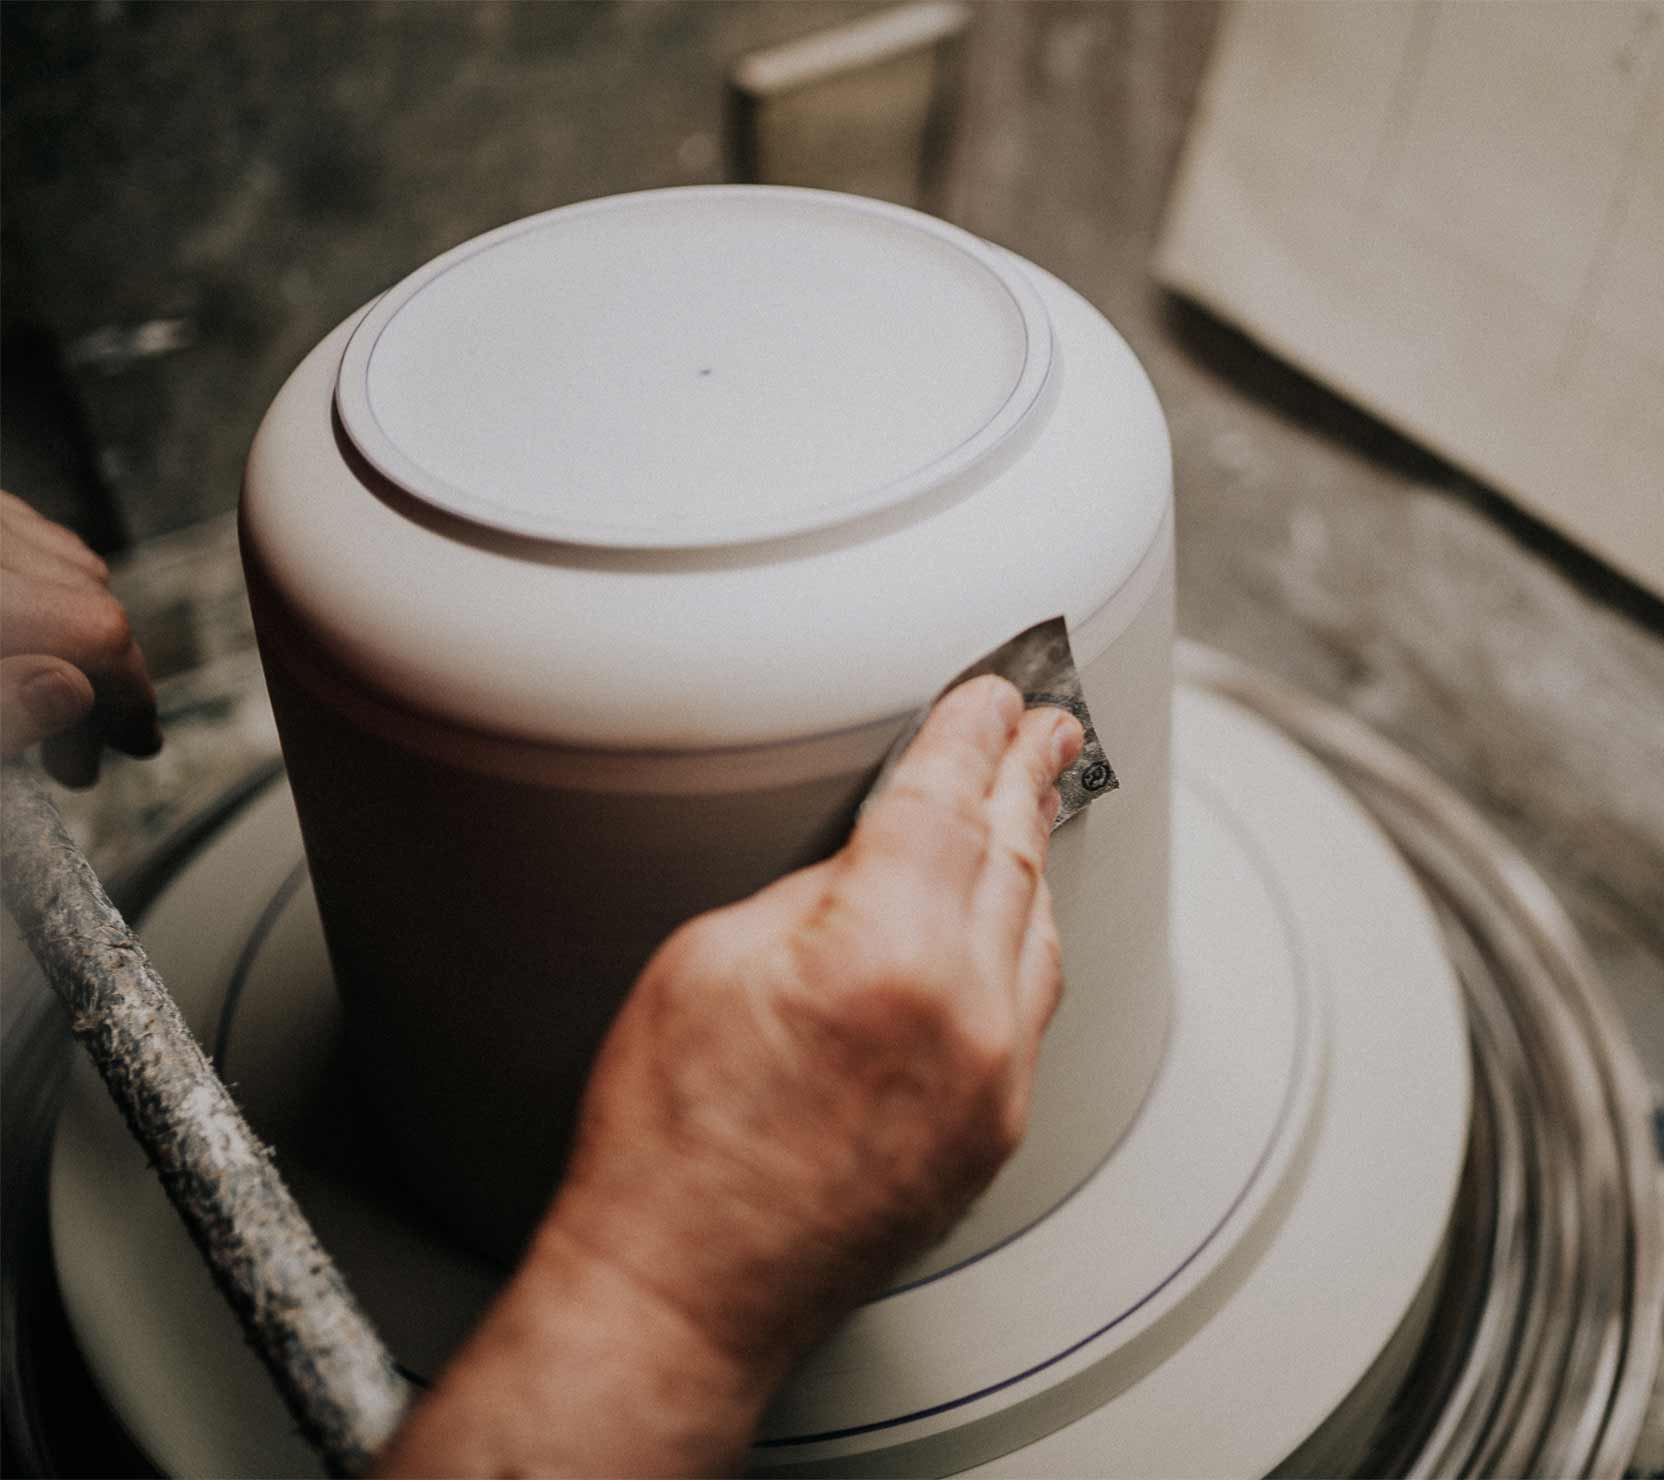 We fire our clay in a 1000° kiln, producing durable, long-lasting tableware